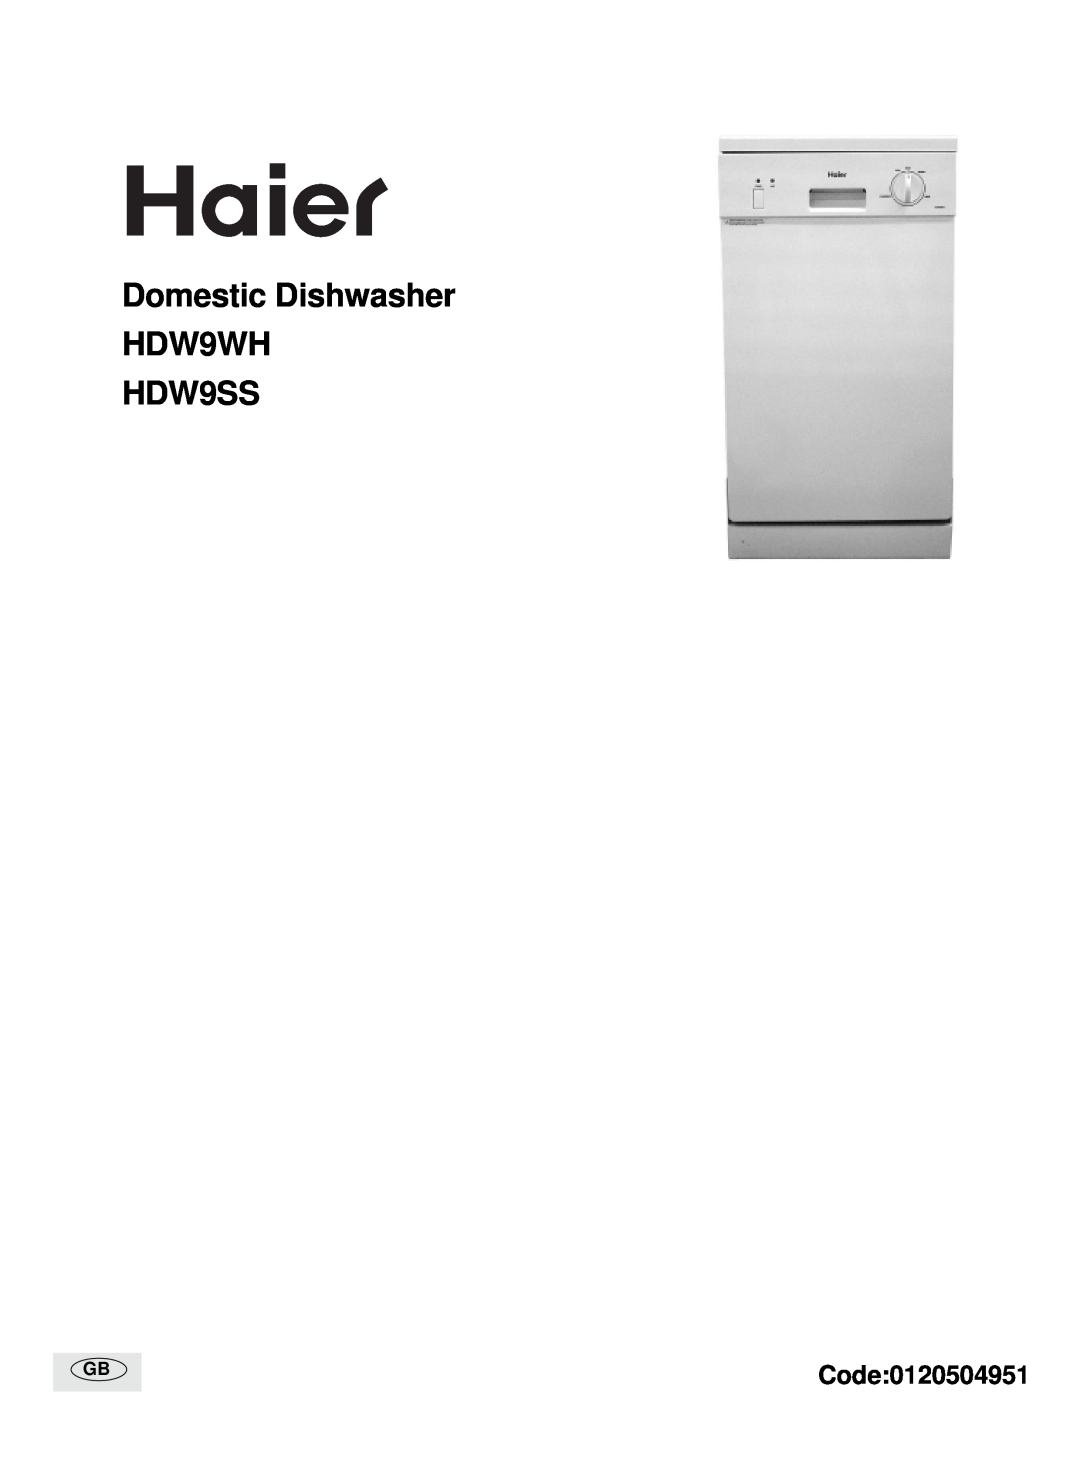 Haier manual Domestic Dishwasher HDW9WH HDW9SS, Code0120504951 